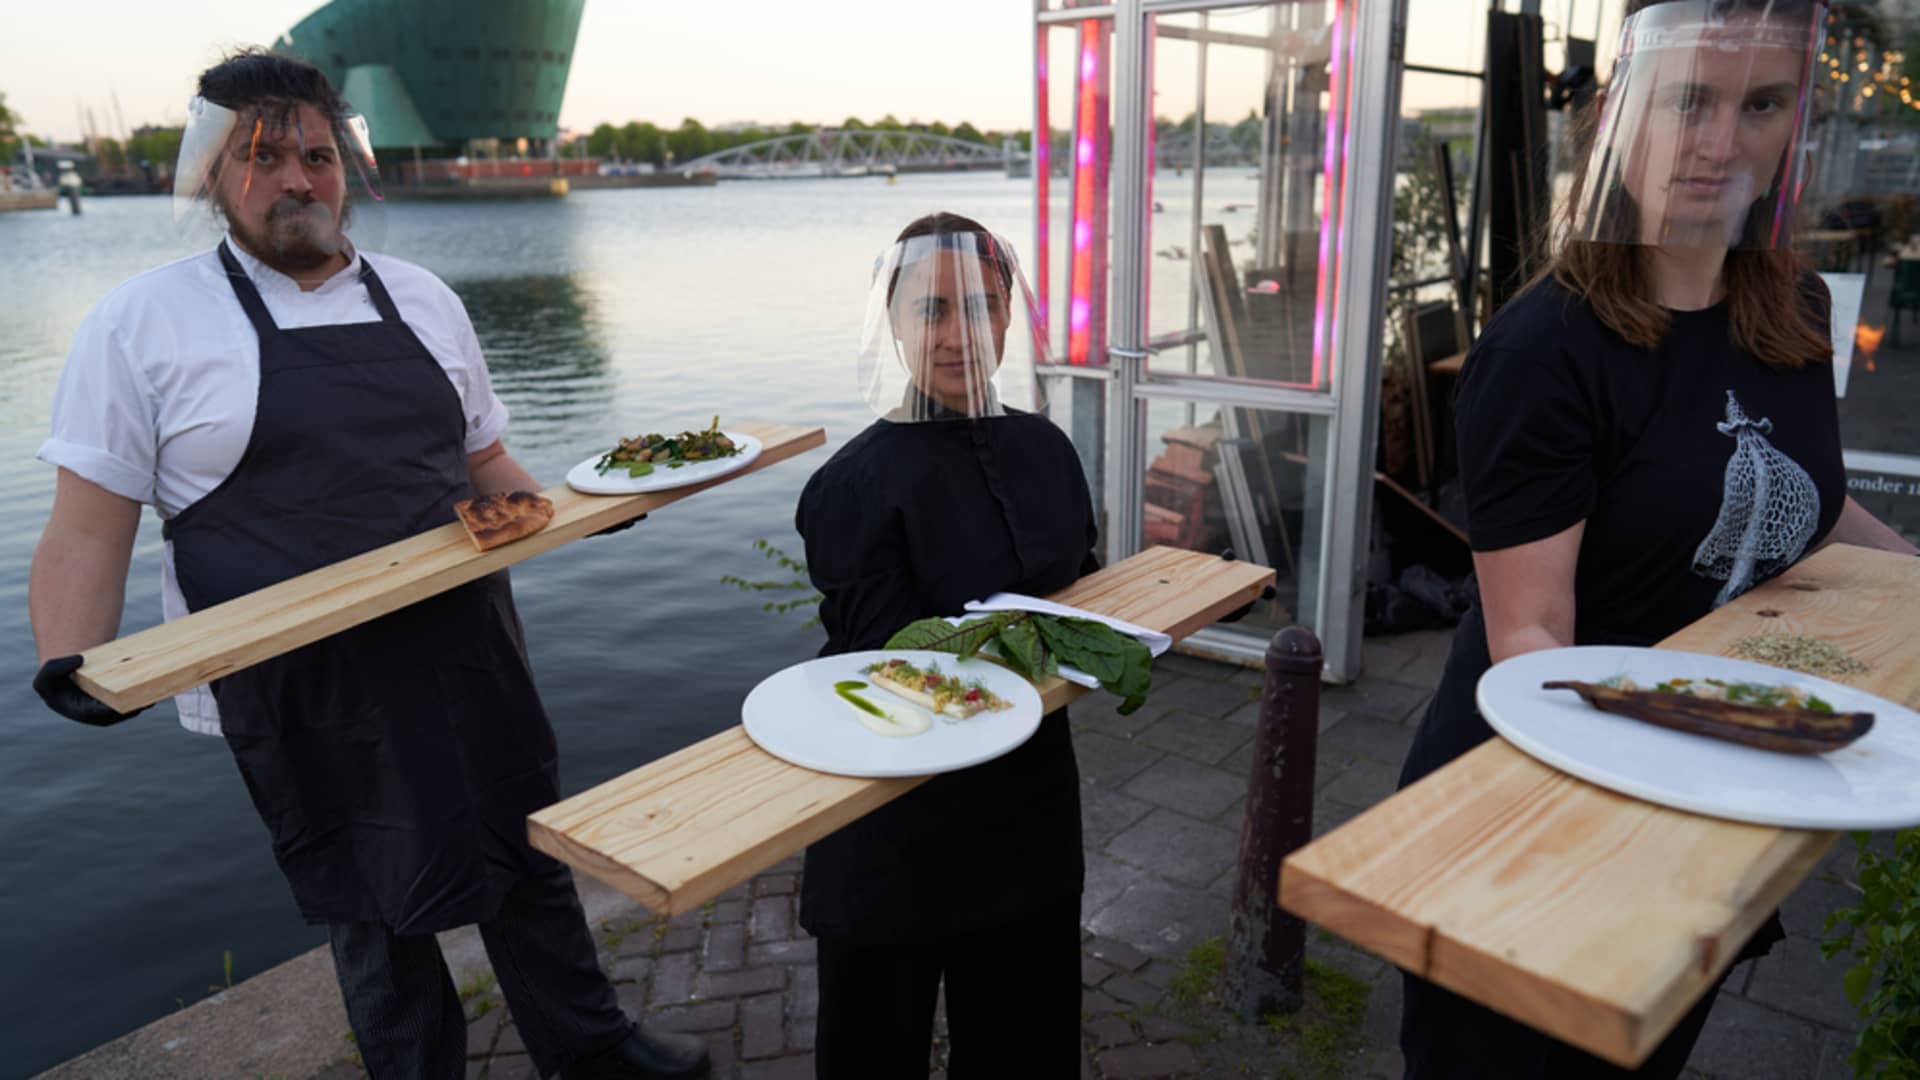 Waiters wear face shields and gloves and rely on long wooden boards to serve diners.